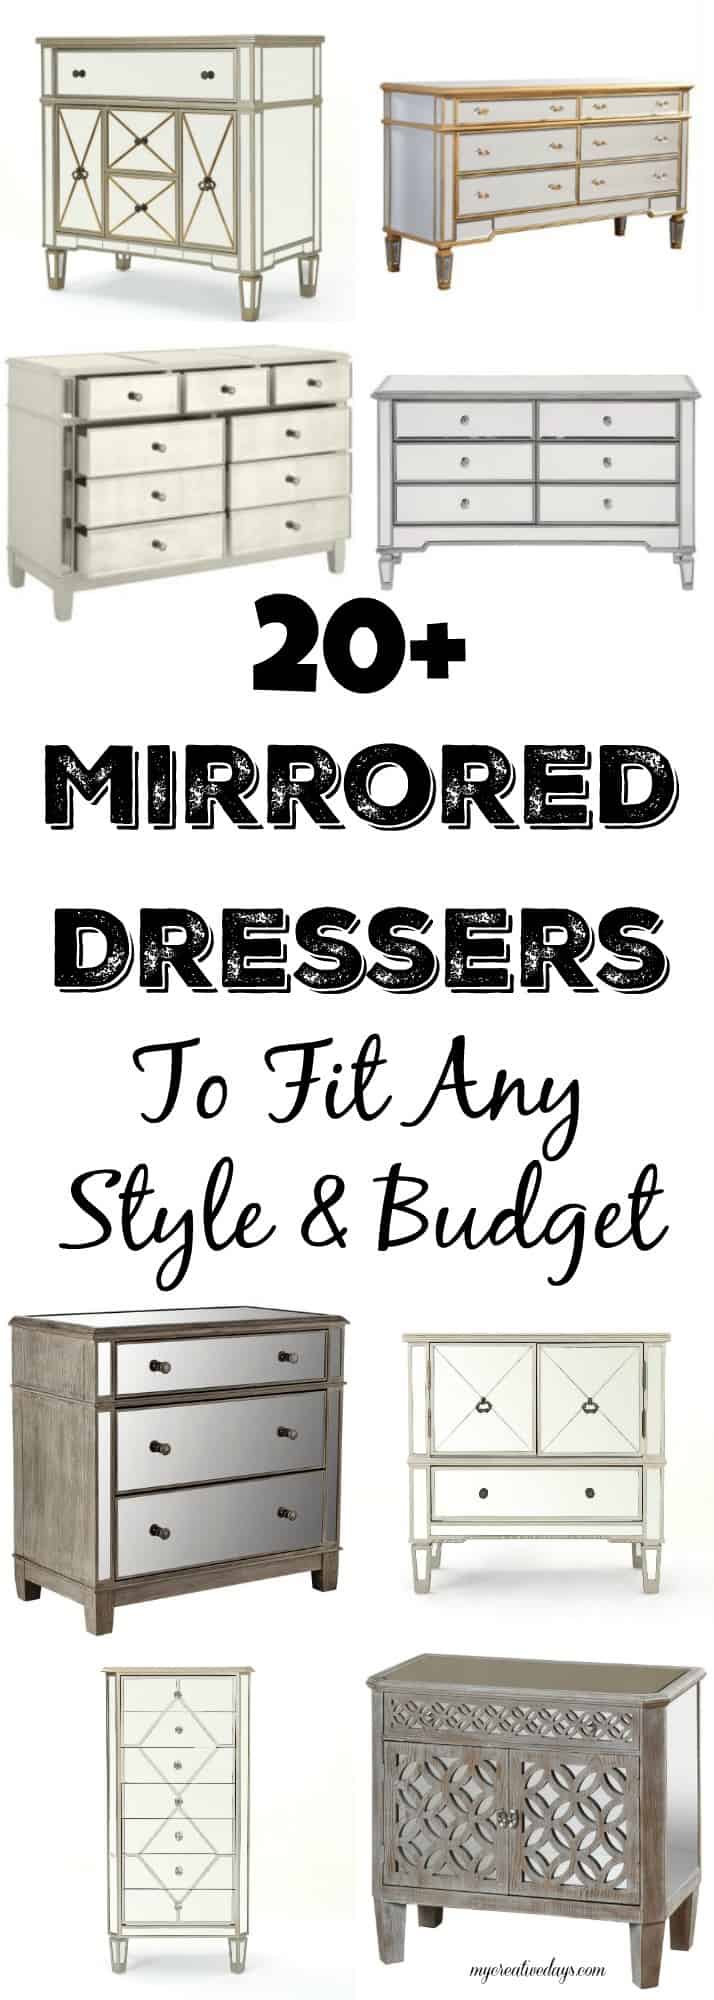 Mirrored Dressers - More Than 20 Options To Fit Any Style & Budget